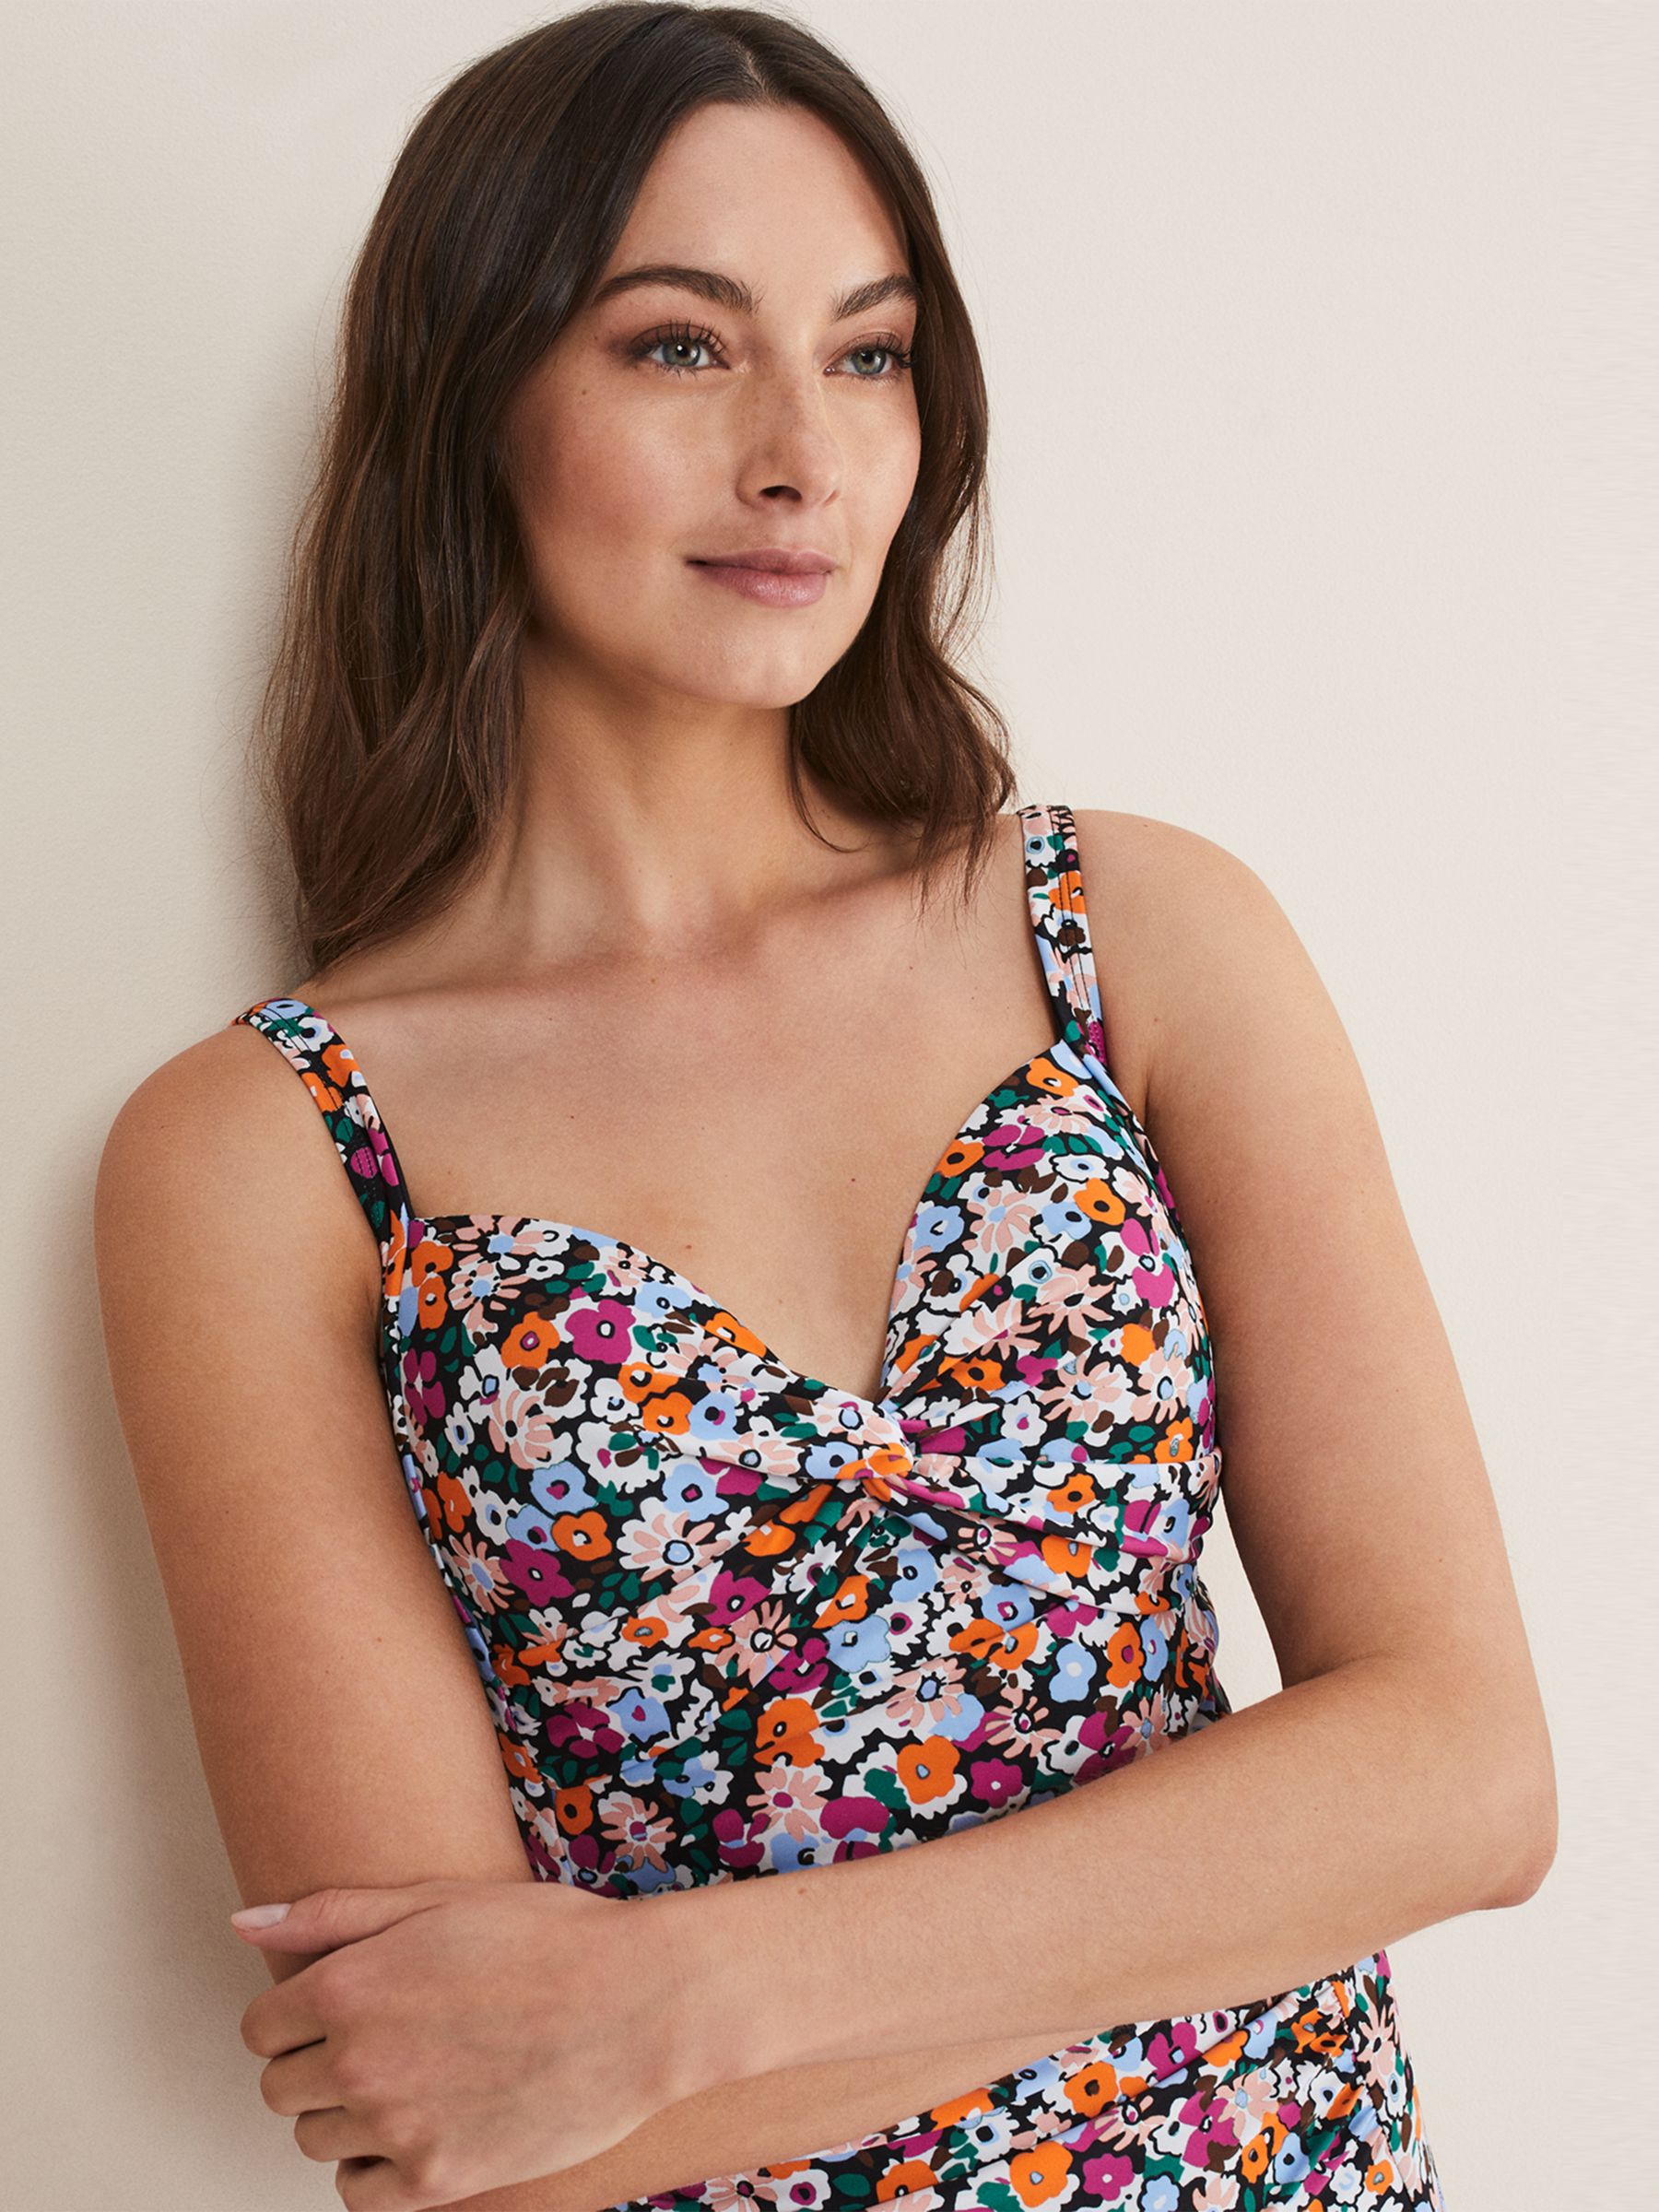 Phase Eight Daphne Ditsy Floral Swimsuit, Multi, 14